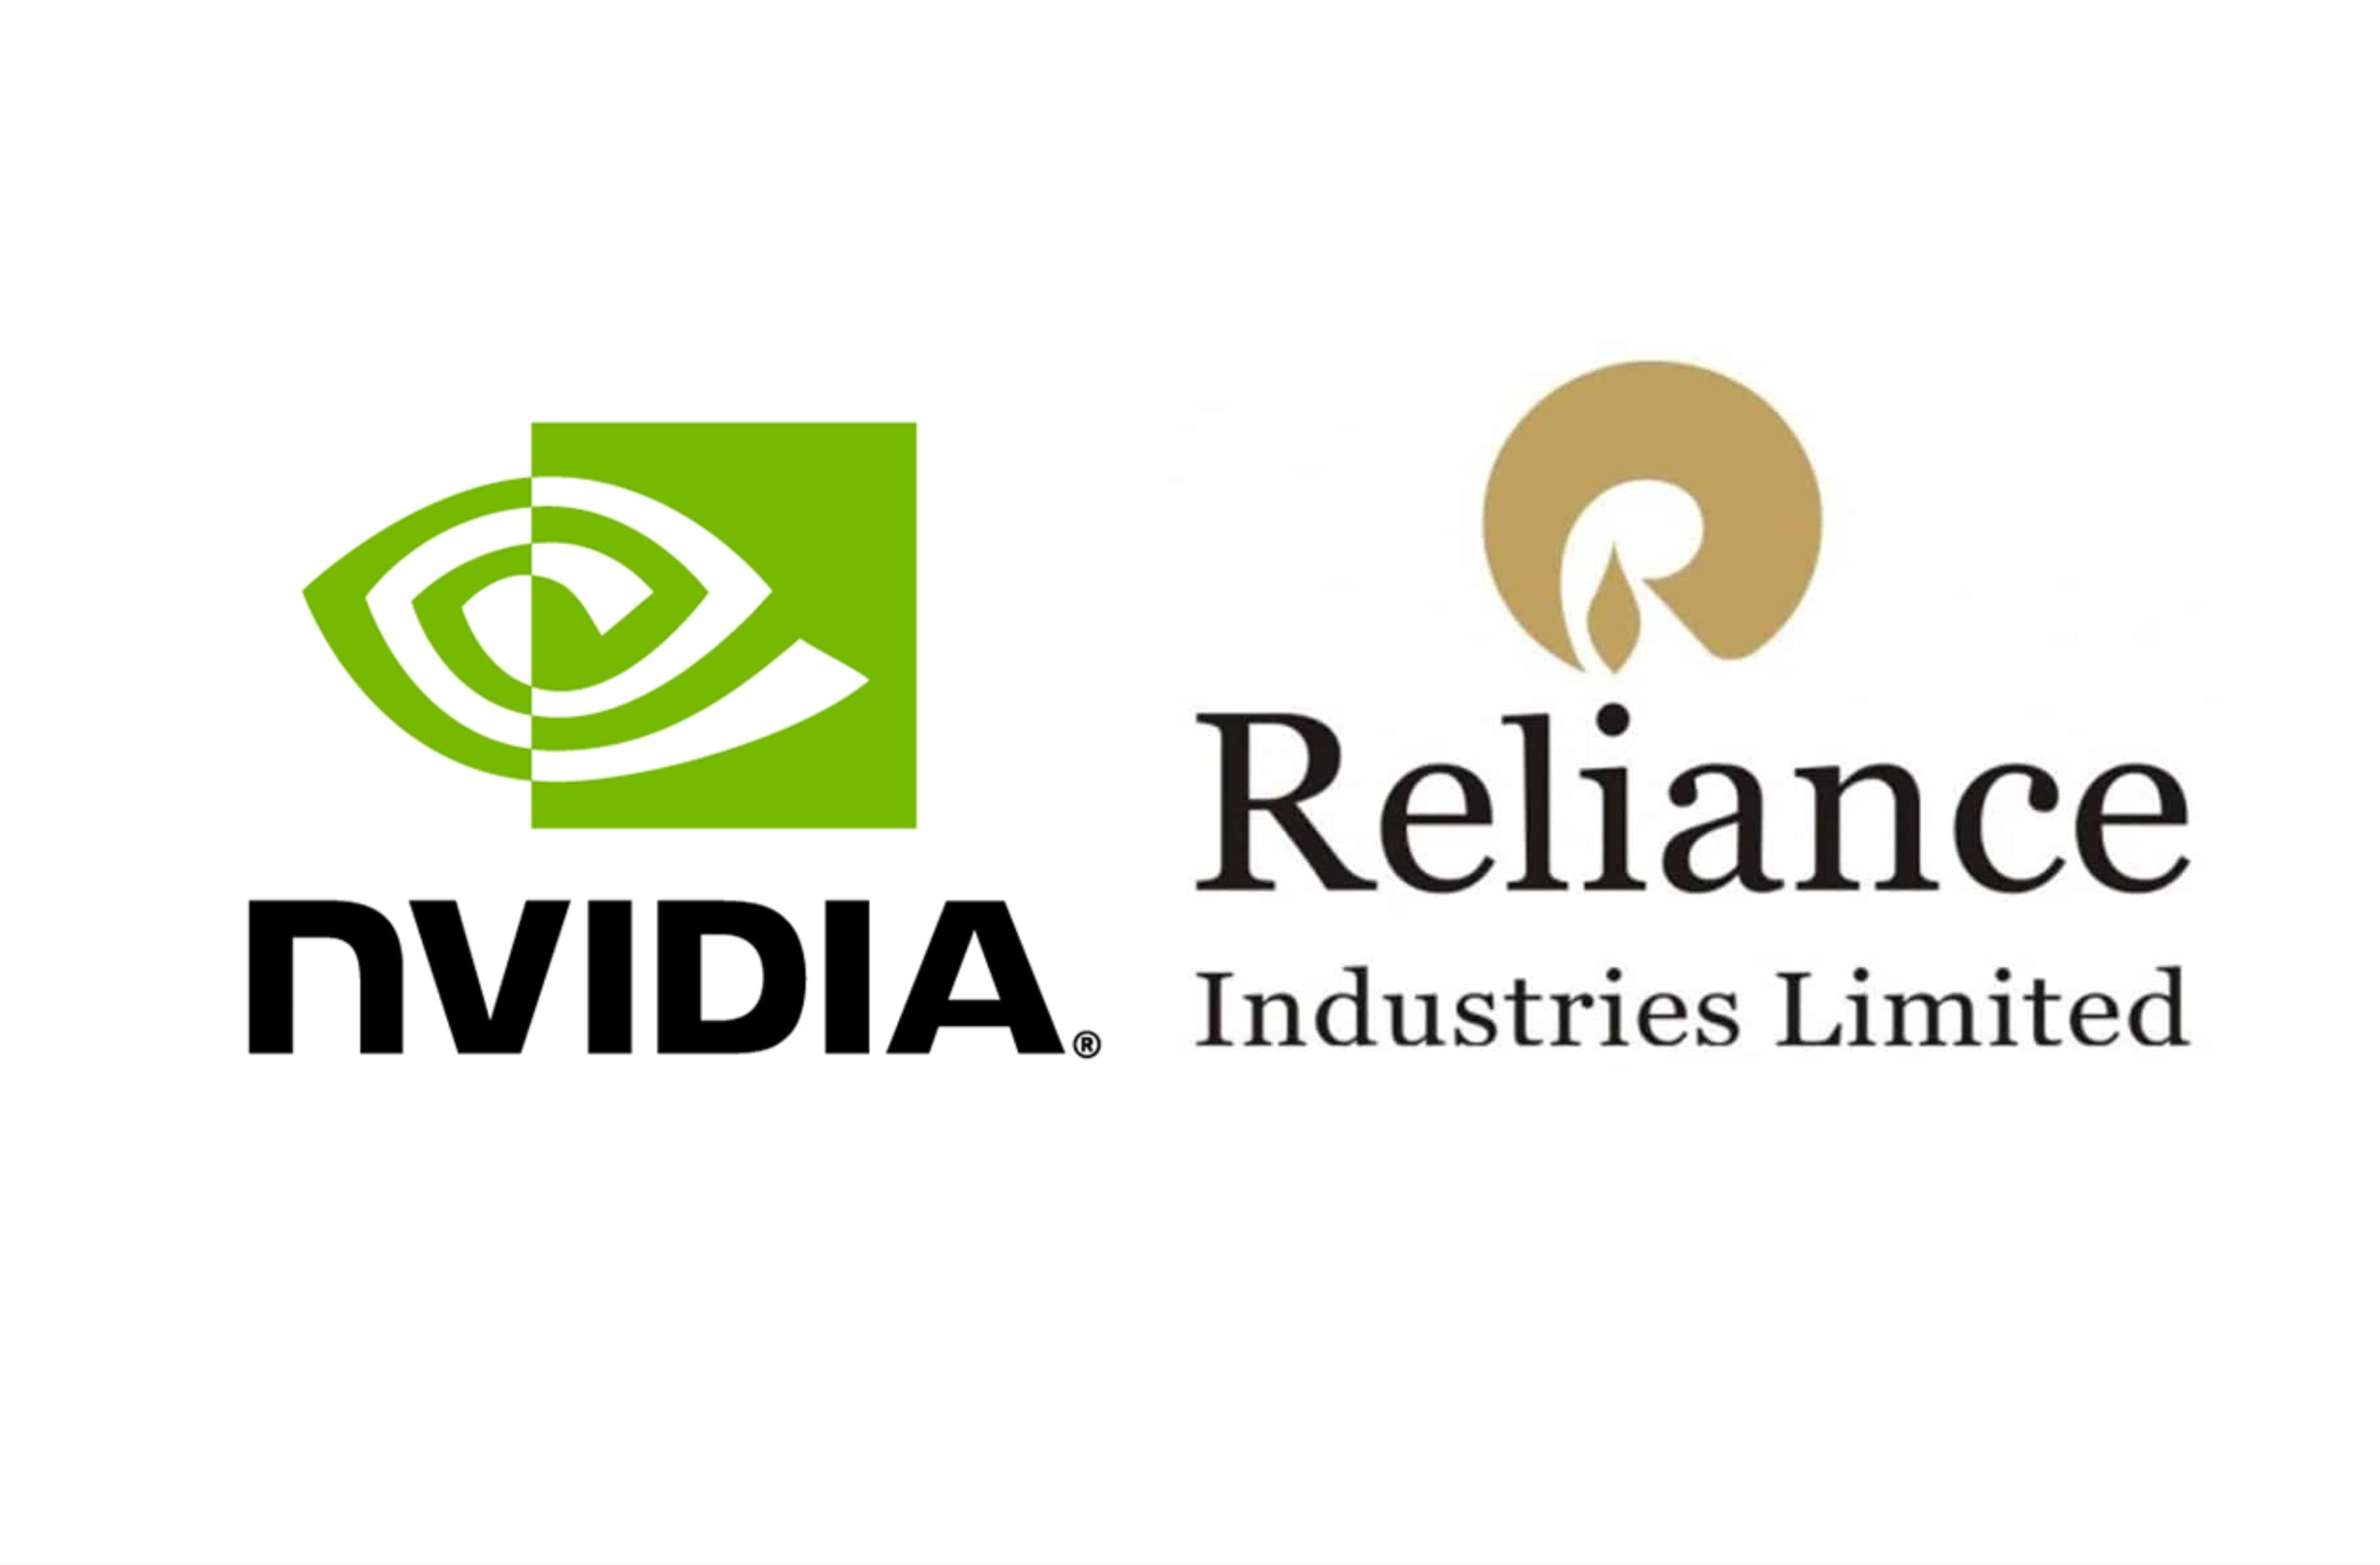 Reliance Infrastructure Logo Png, Transparent Png - 3508x2480(#6182833) -  PngFind